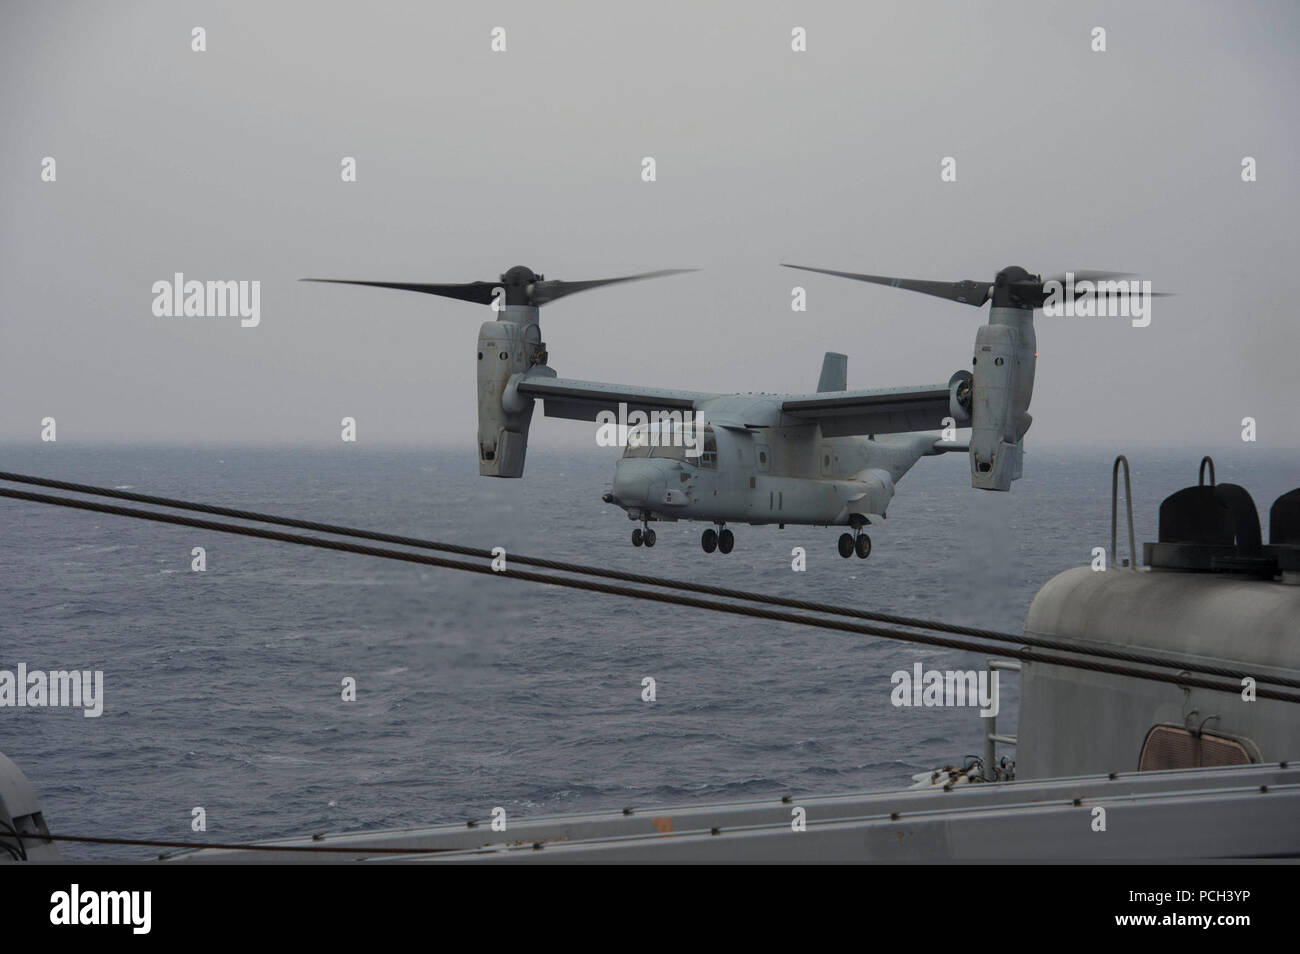 A U.S. Marine Corps MV-22B Osprey tiltrotor aircraft assigned to Marine Medium Tiltrotor Squadron (VMM) 265 prepares to land aboard the amphibious dock landing ship USS Ashland (LSD 48) in the East China Sea March 20, 2014. The Ashland was part of the Bonhomme Richard Amphibious Readiness Group and was underway in the U.S. 7th Fleet area of responsibility supporting maritime security operations and theater security cooperation efforts. Stock Photo